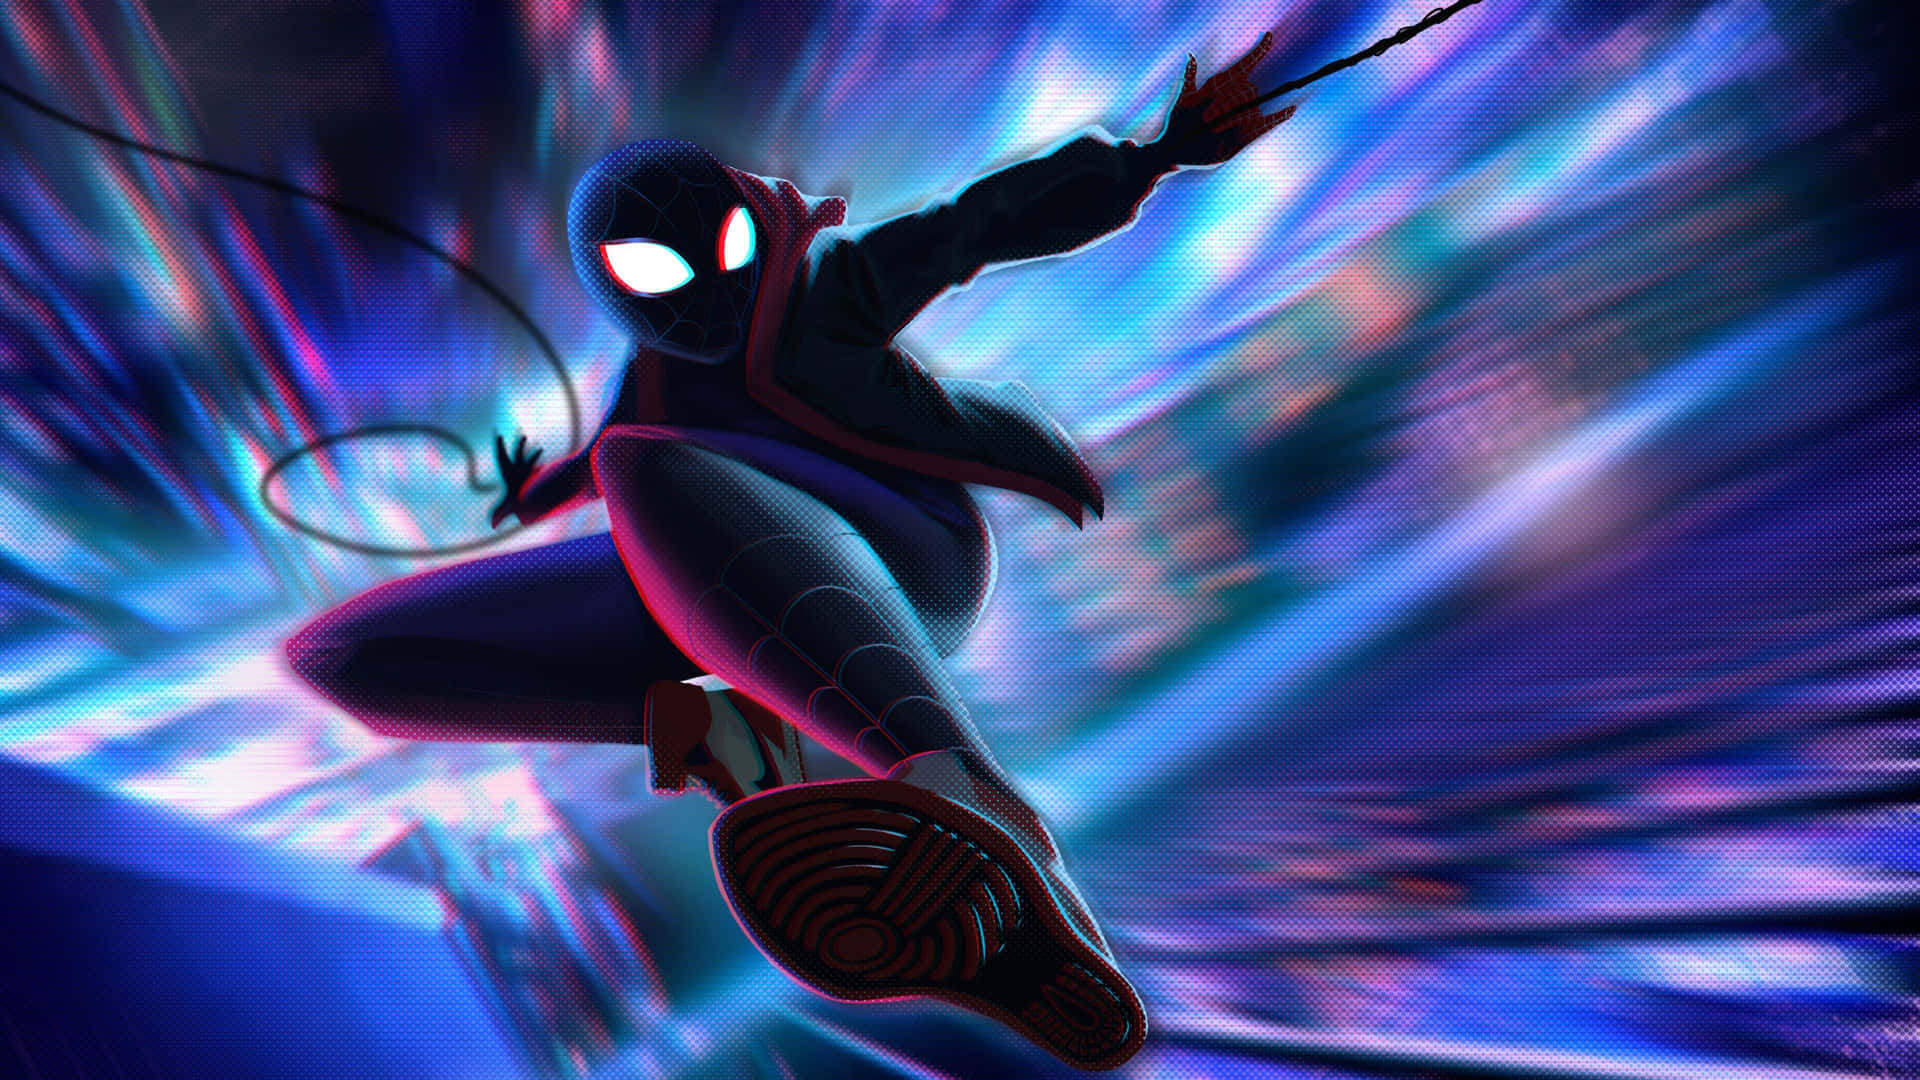 A Spectacular Look into the world of Spider-Man Wallpaper